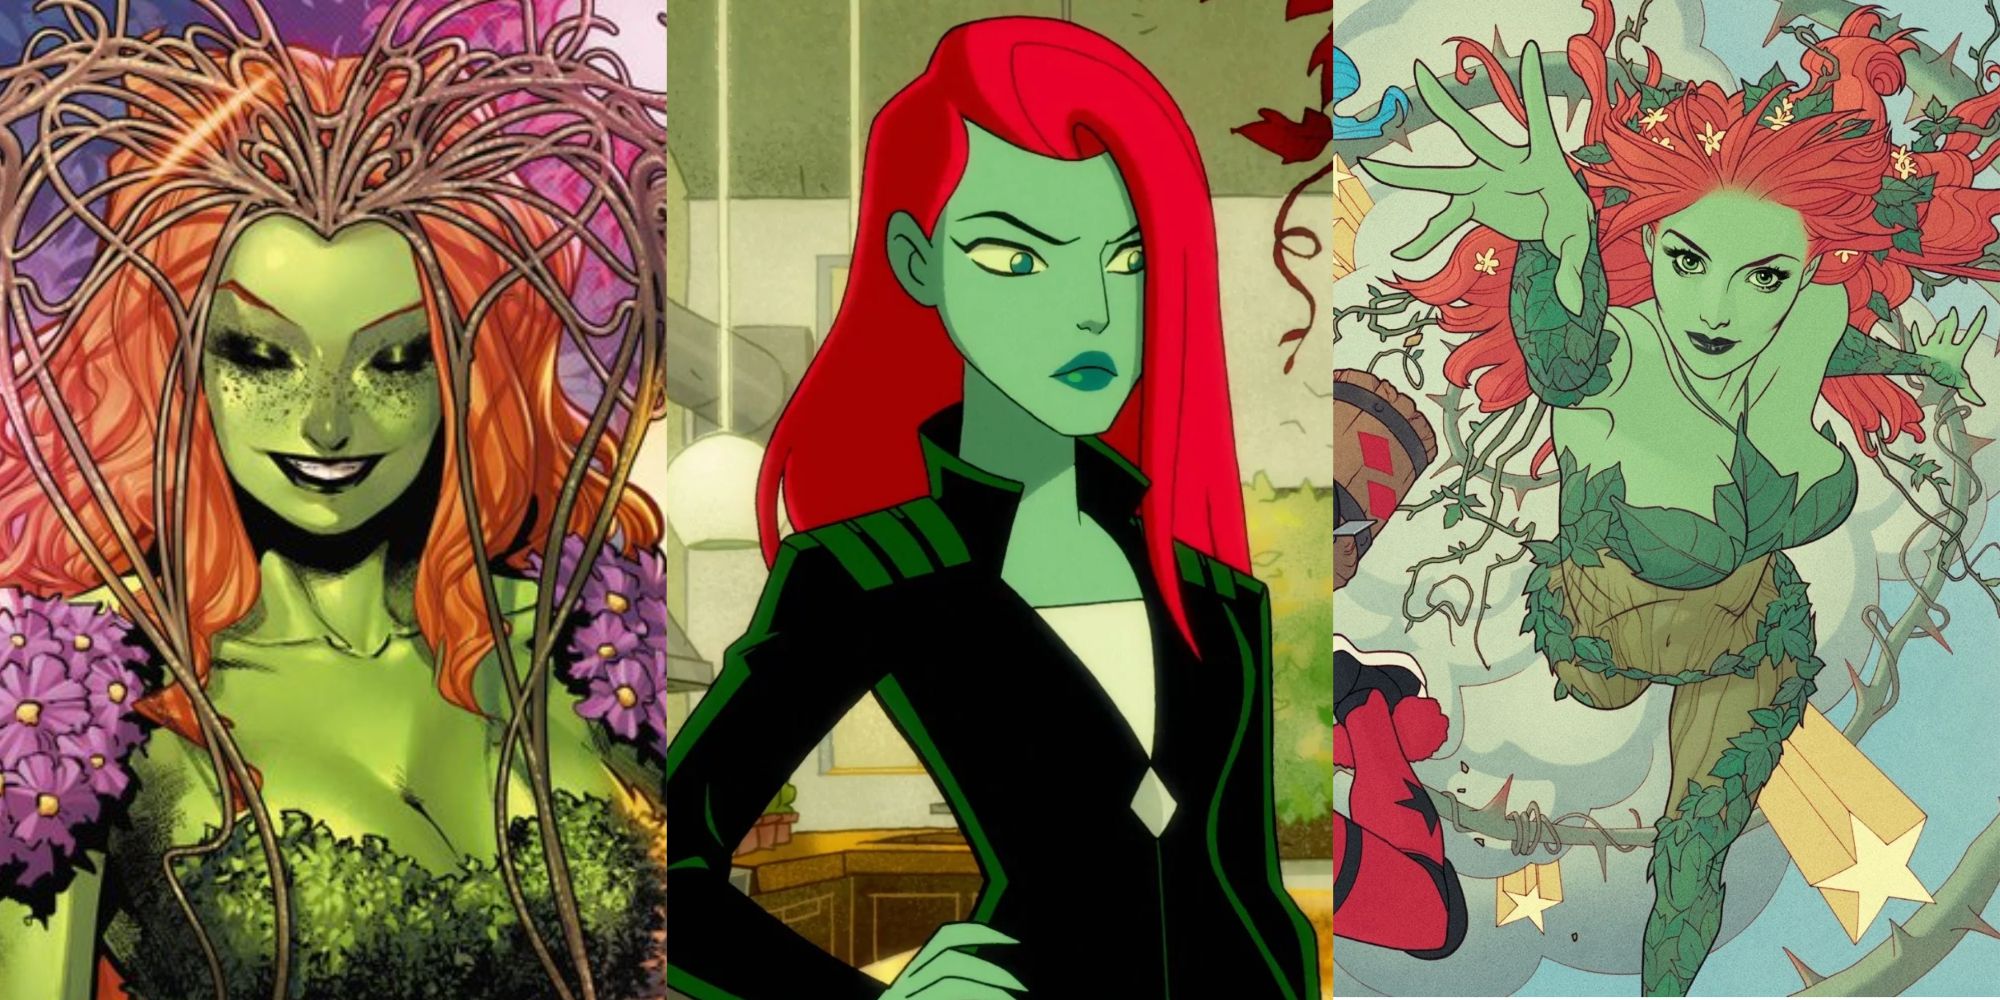 Split image of Queen Ivy from DC Comics, Poison Ivy from HBO Max series, and from Rebirth comics.